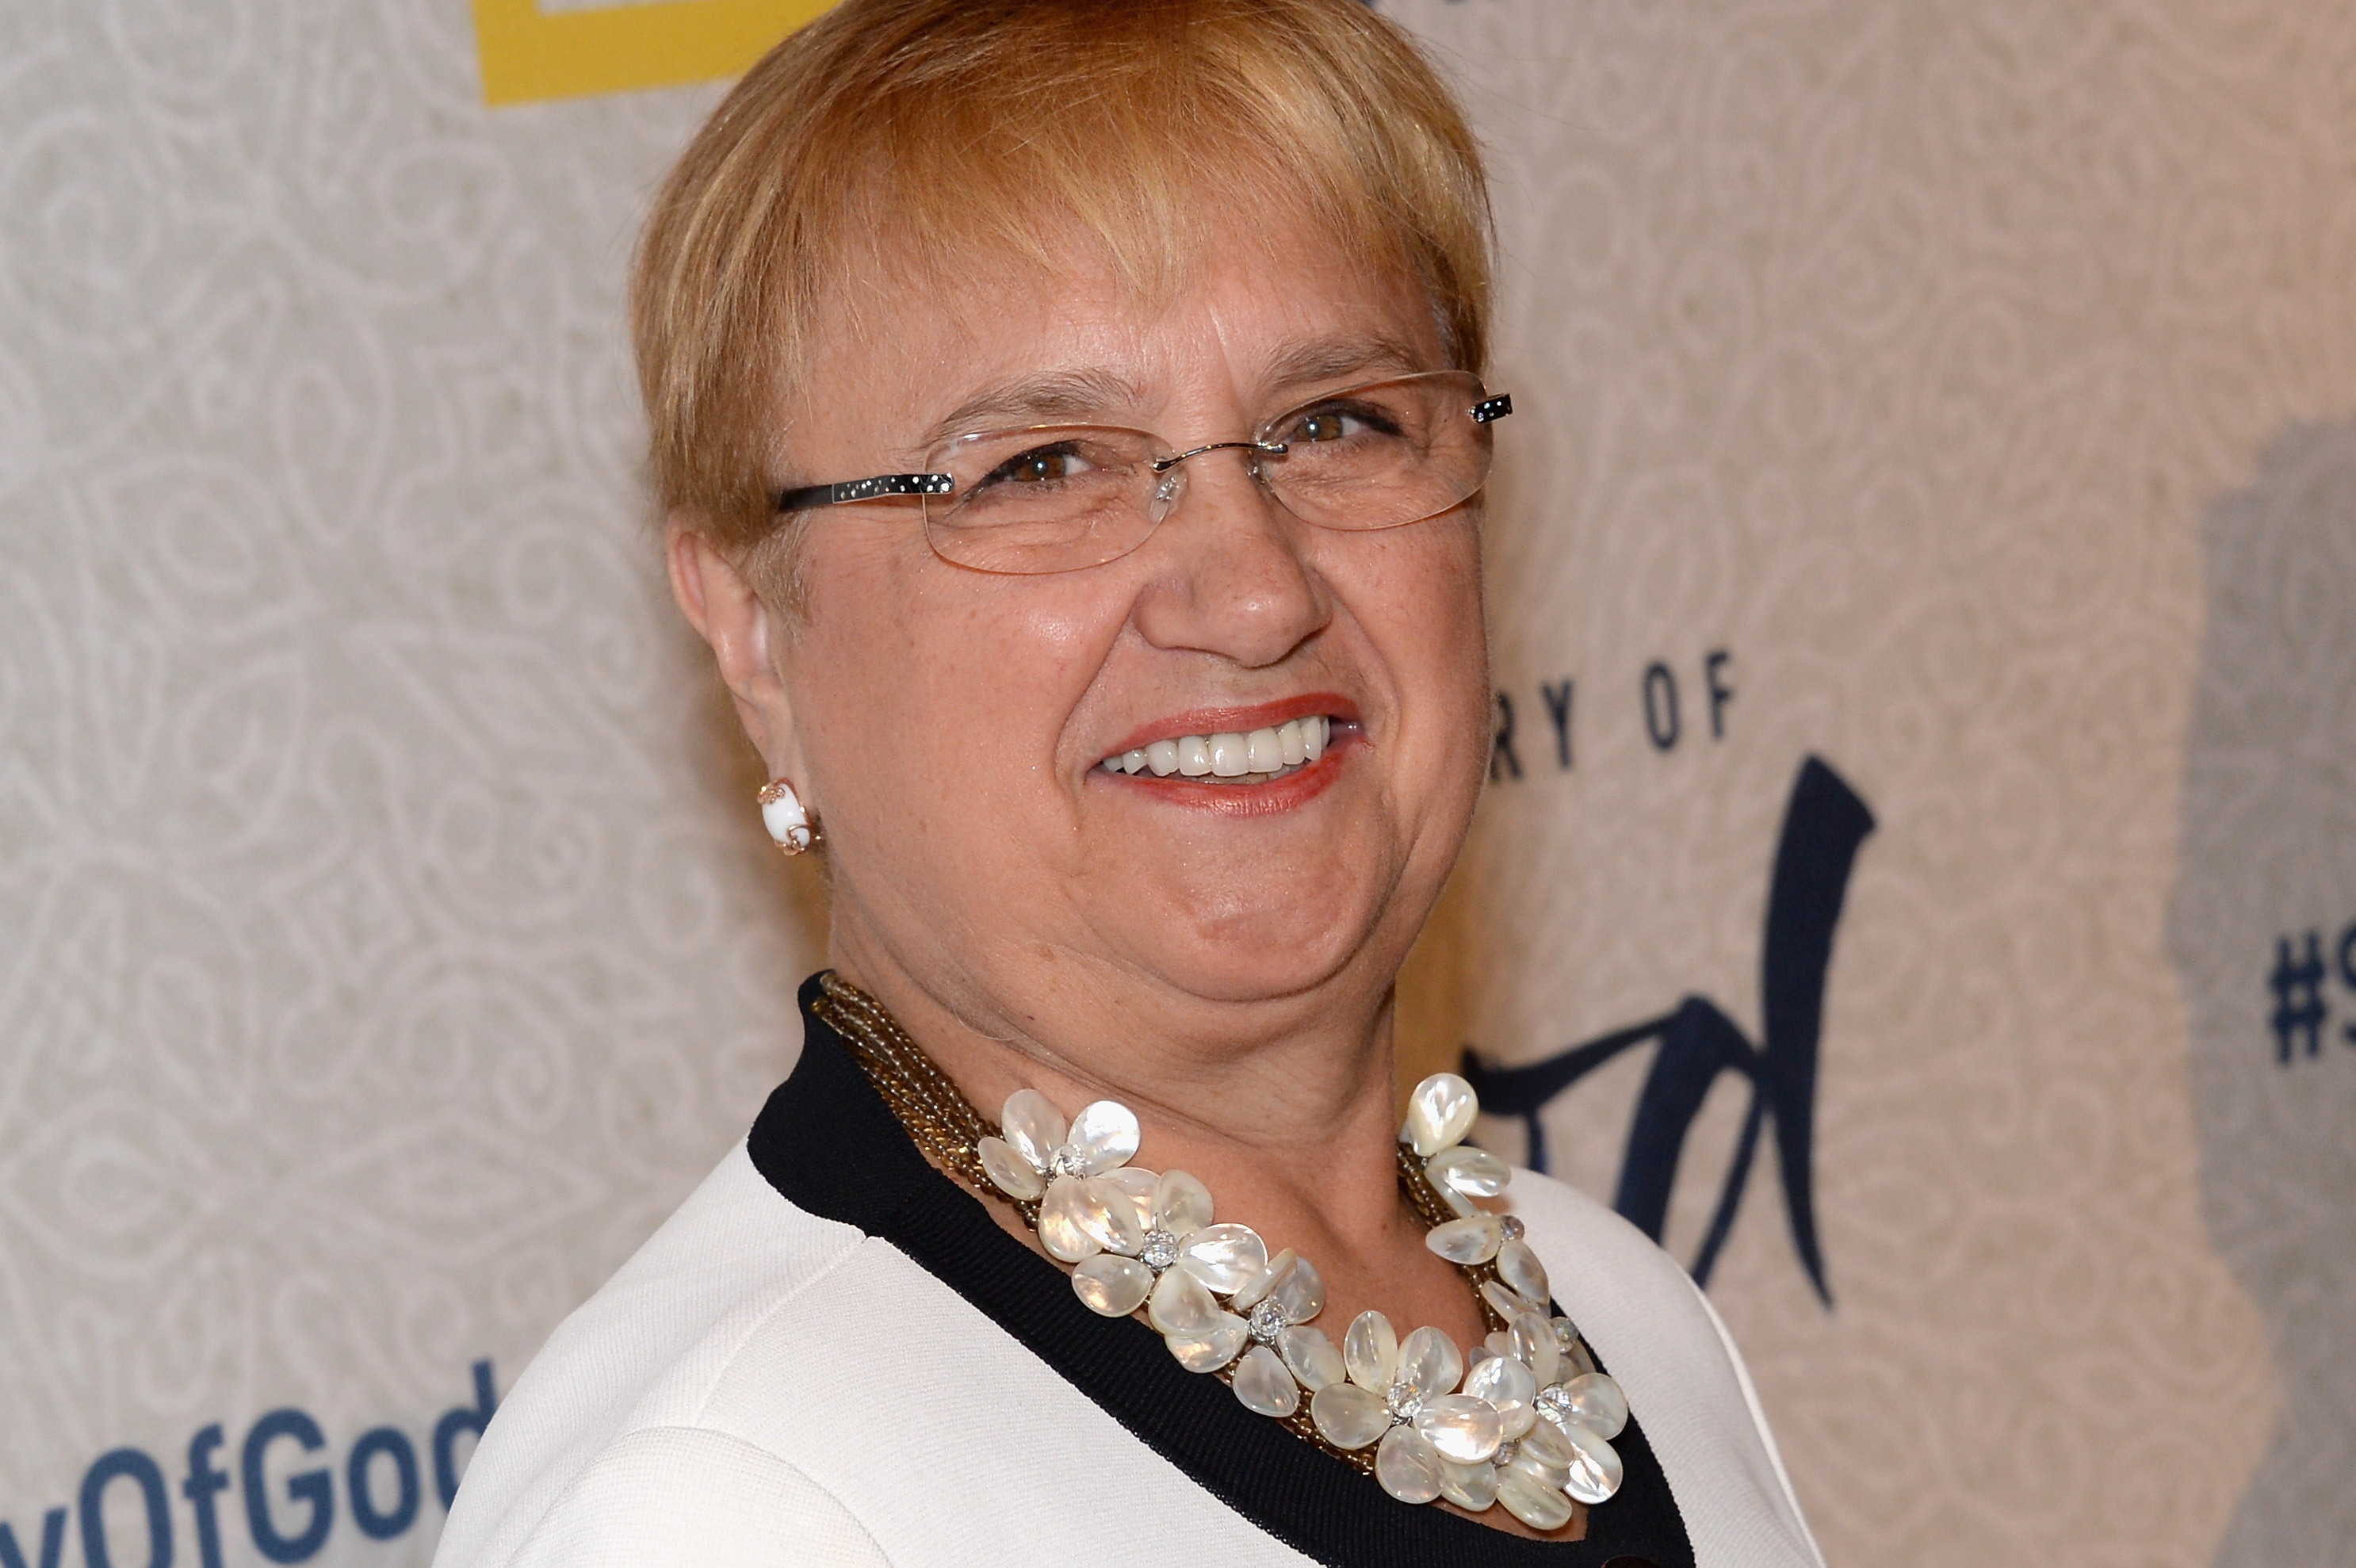 Celebrity chef Lidia Bastianich shares her mother's popular chicken and potatoes recipe.